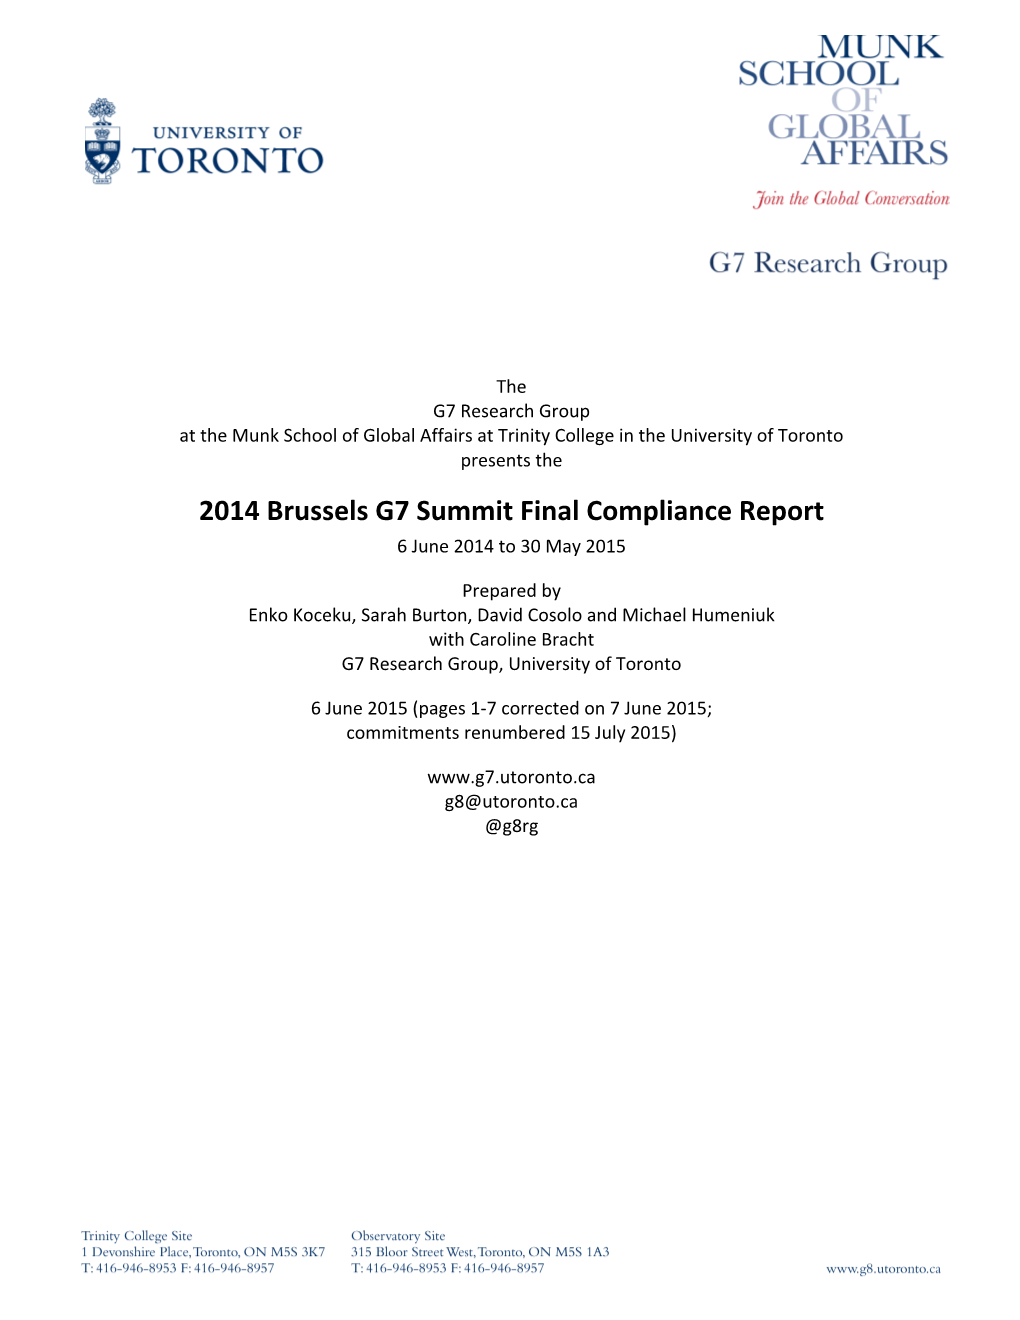 2014 Brussels G7 Summit Final Compliance Report 6 June 2014 to 30 May 2015